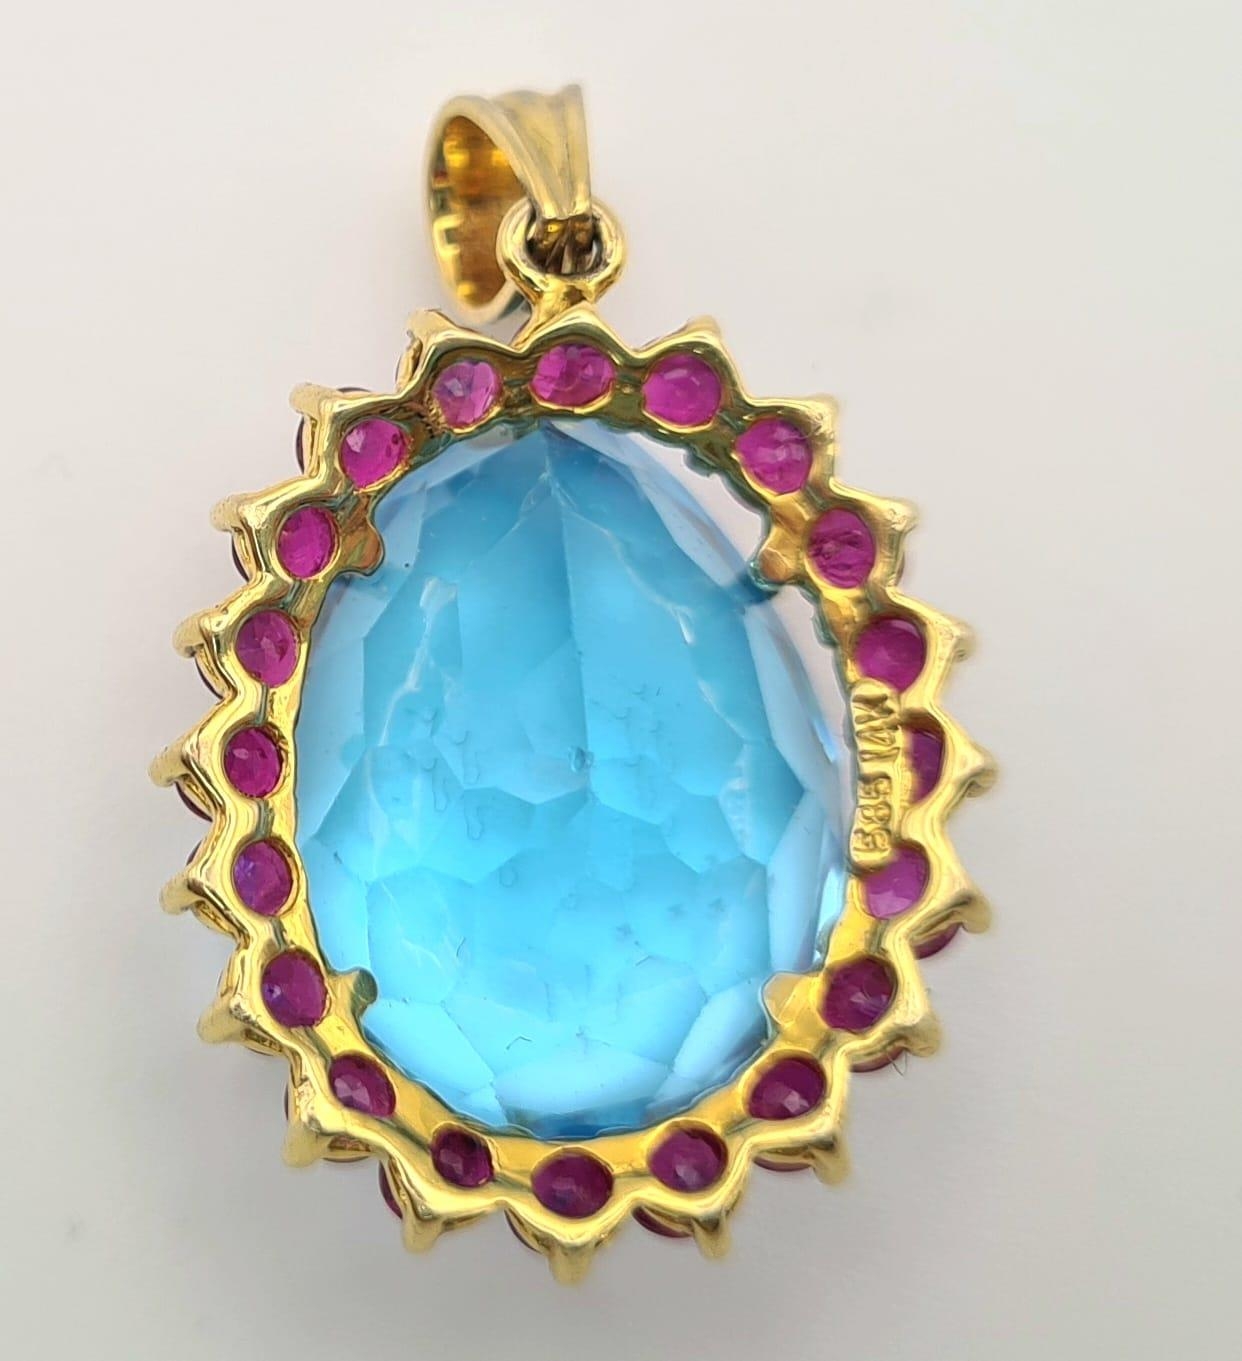 A 14K Yellow Gold Large Topaz and Ruby Pendant. 7.93g total weight. Large bright topaz surrounded by - Image 3 of 4